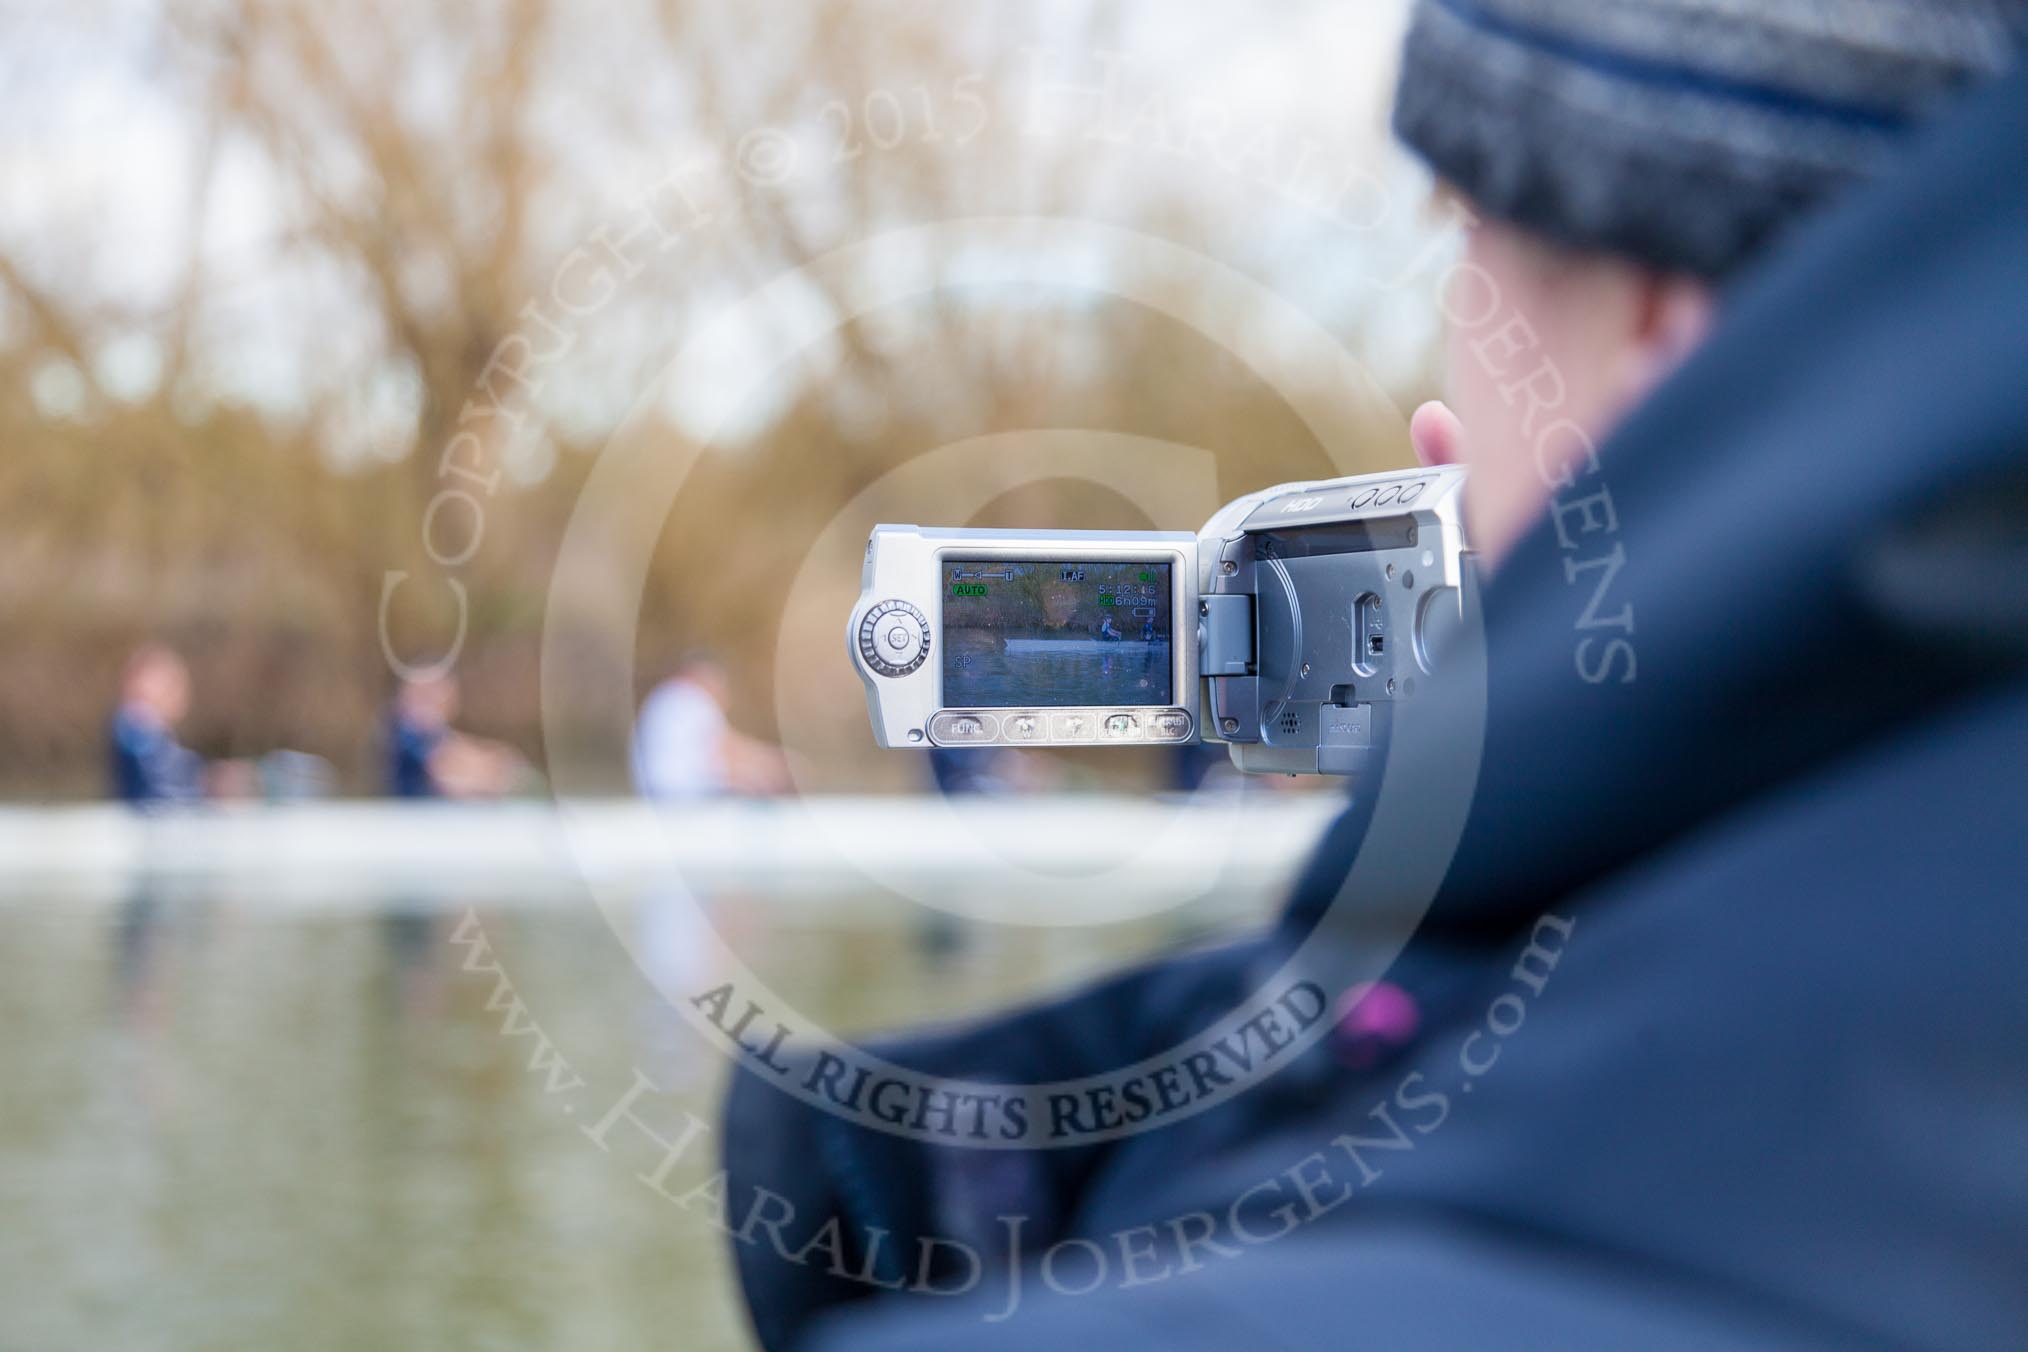 The Boat Race season 2015: OUWBC training Wallingford.

Wallingford,

United Kingdom,
on 04 March 2015 at 16:37, image #212